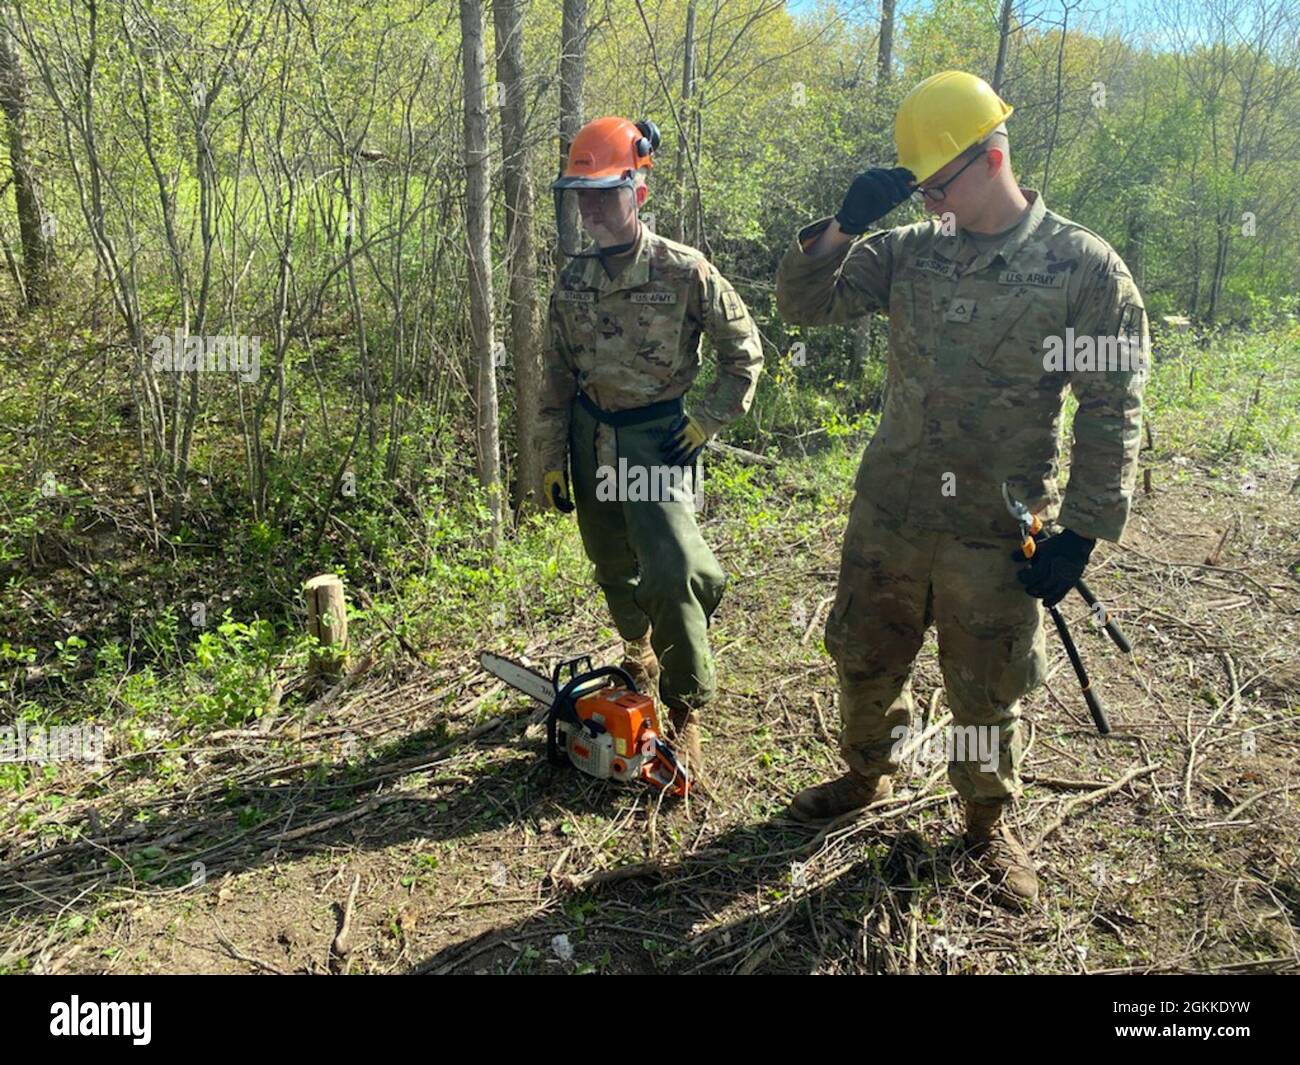 New York Army National Guard Spc. Zachary Stabler, left, and Pfc. Caleb Messing, assigned to the 152nd Engineer Company, prepare to continue debris removal and wood clearing in support of training lane construction at the National Guard Youngstown Local Training Area in Youngstown, N.Y., May 15, 2021 during unit annual training. The company returned to the field for collective training for engineer tasks after a year of virtual training, constructing an Army Combat Fitness Course, a Situational Training Exercise lanes course and a land navigation course. Stock Photo